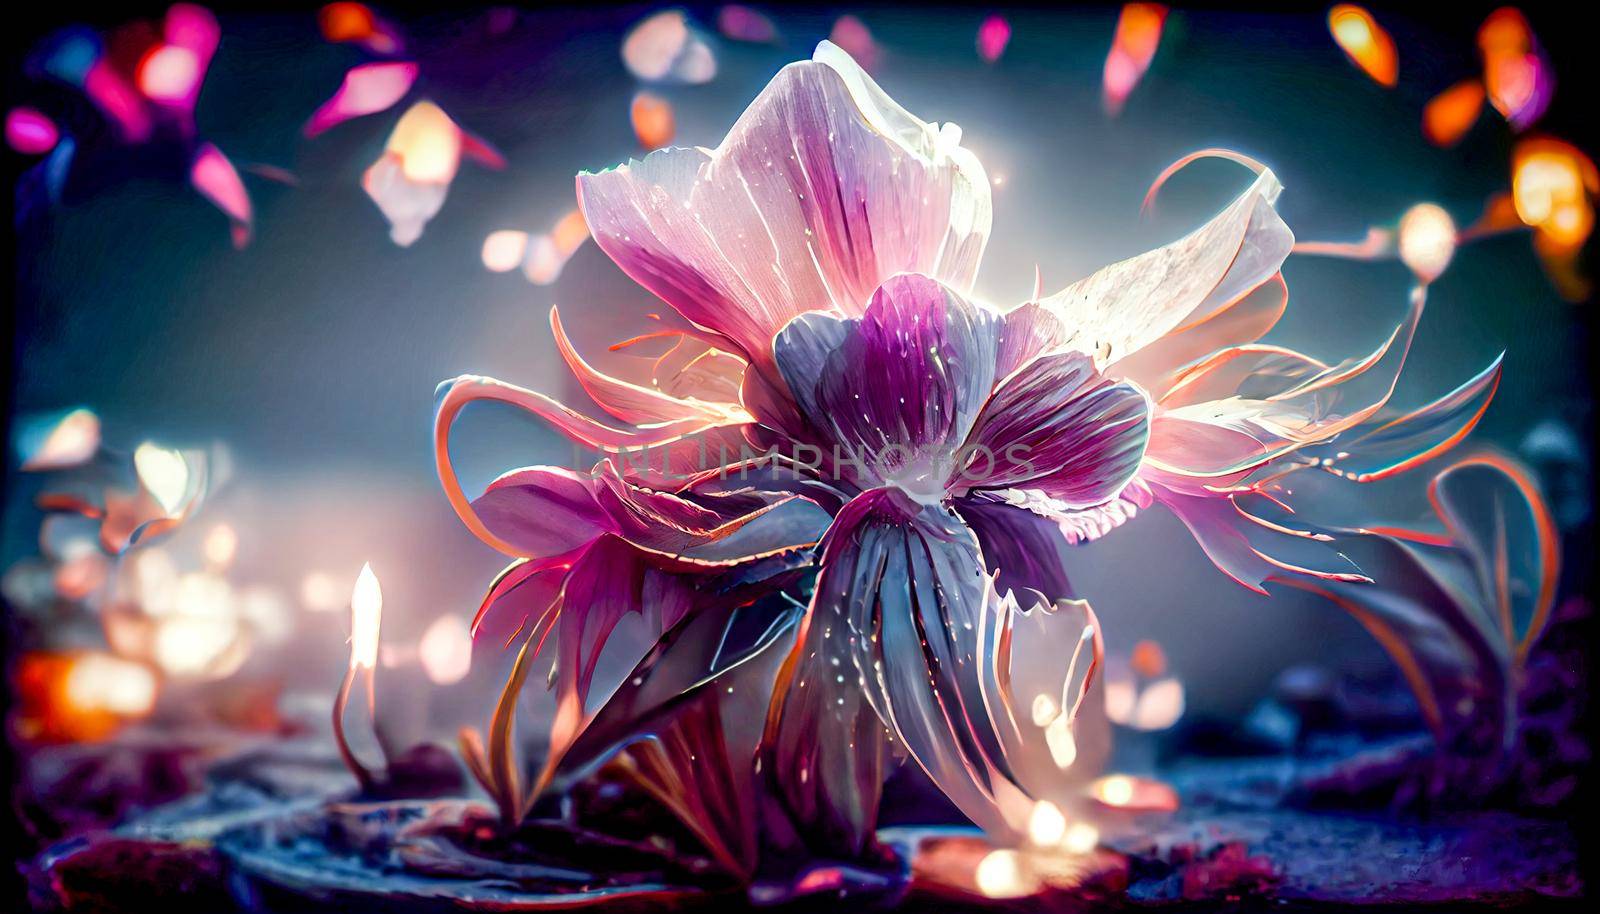 Gorgeous fantasy flower, Beauty and fresh spring collection. 3D Digital art background by FokasuArt